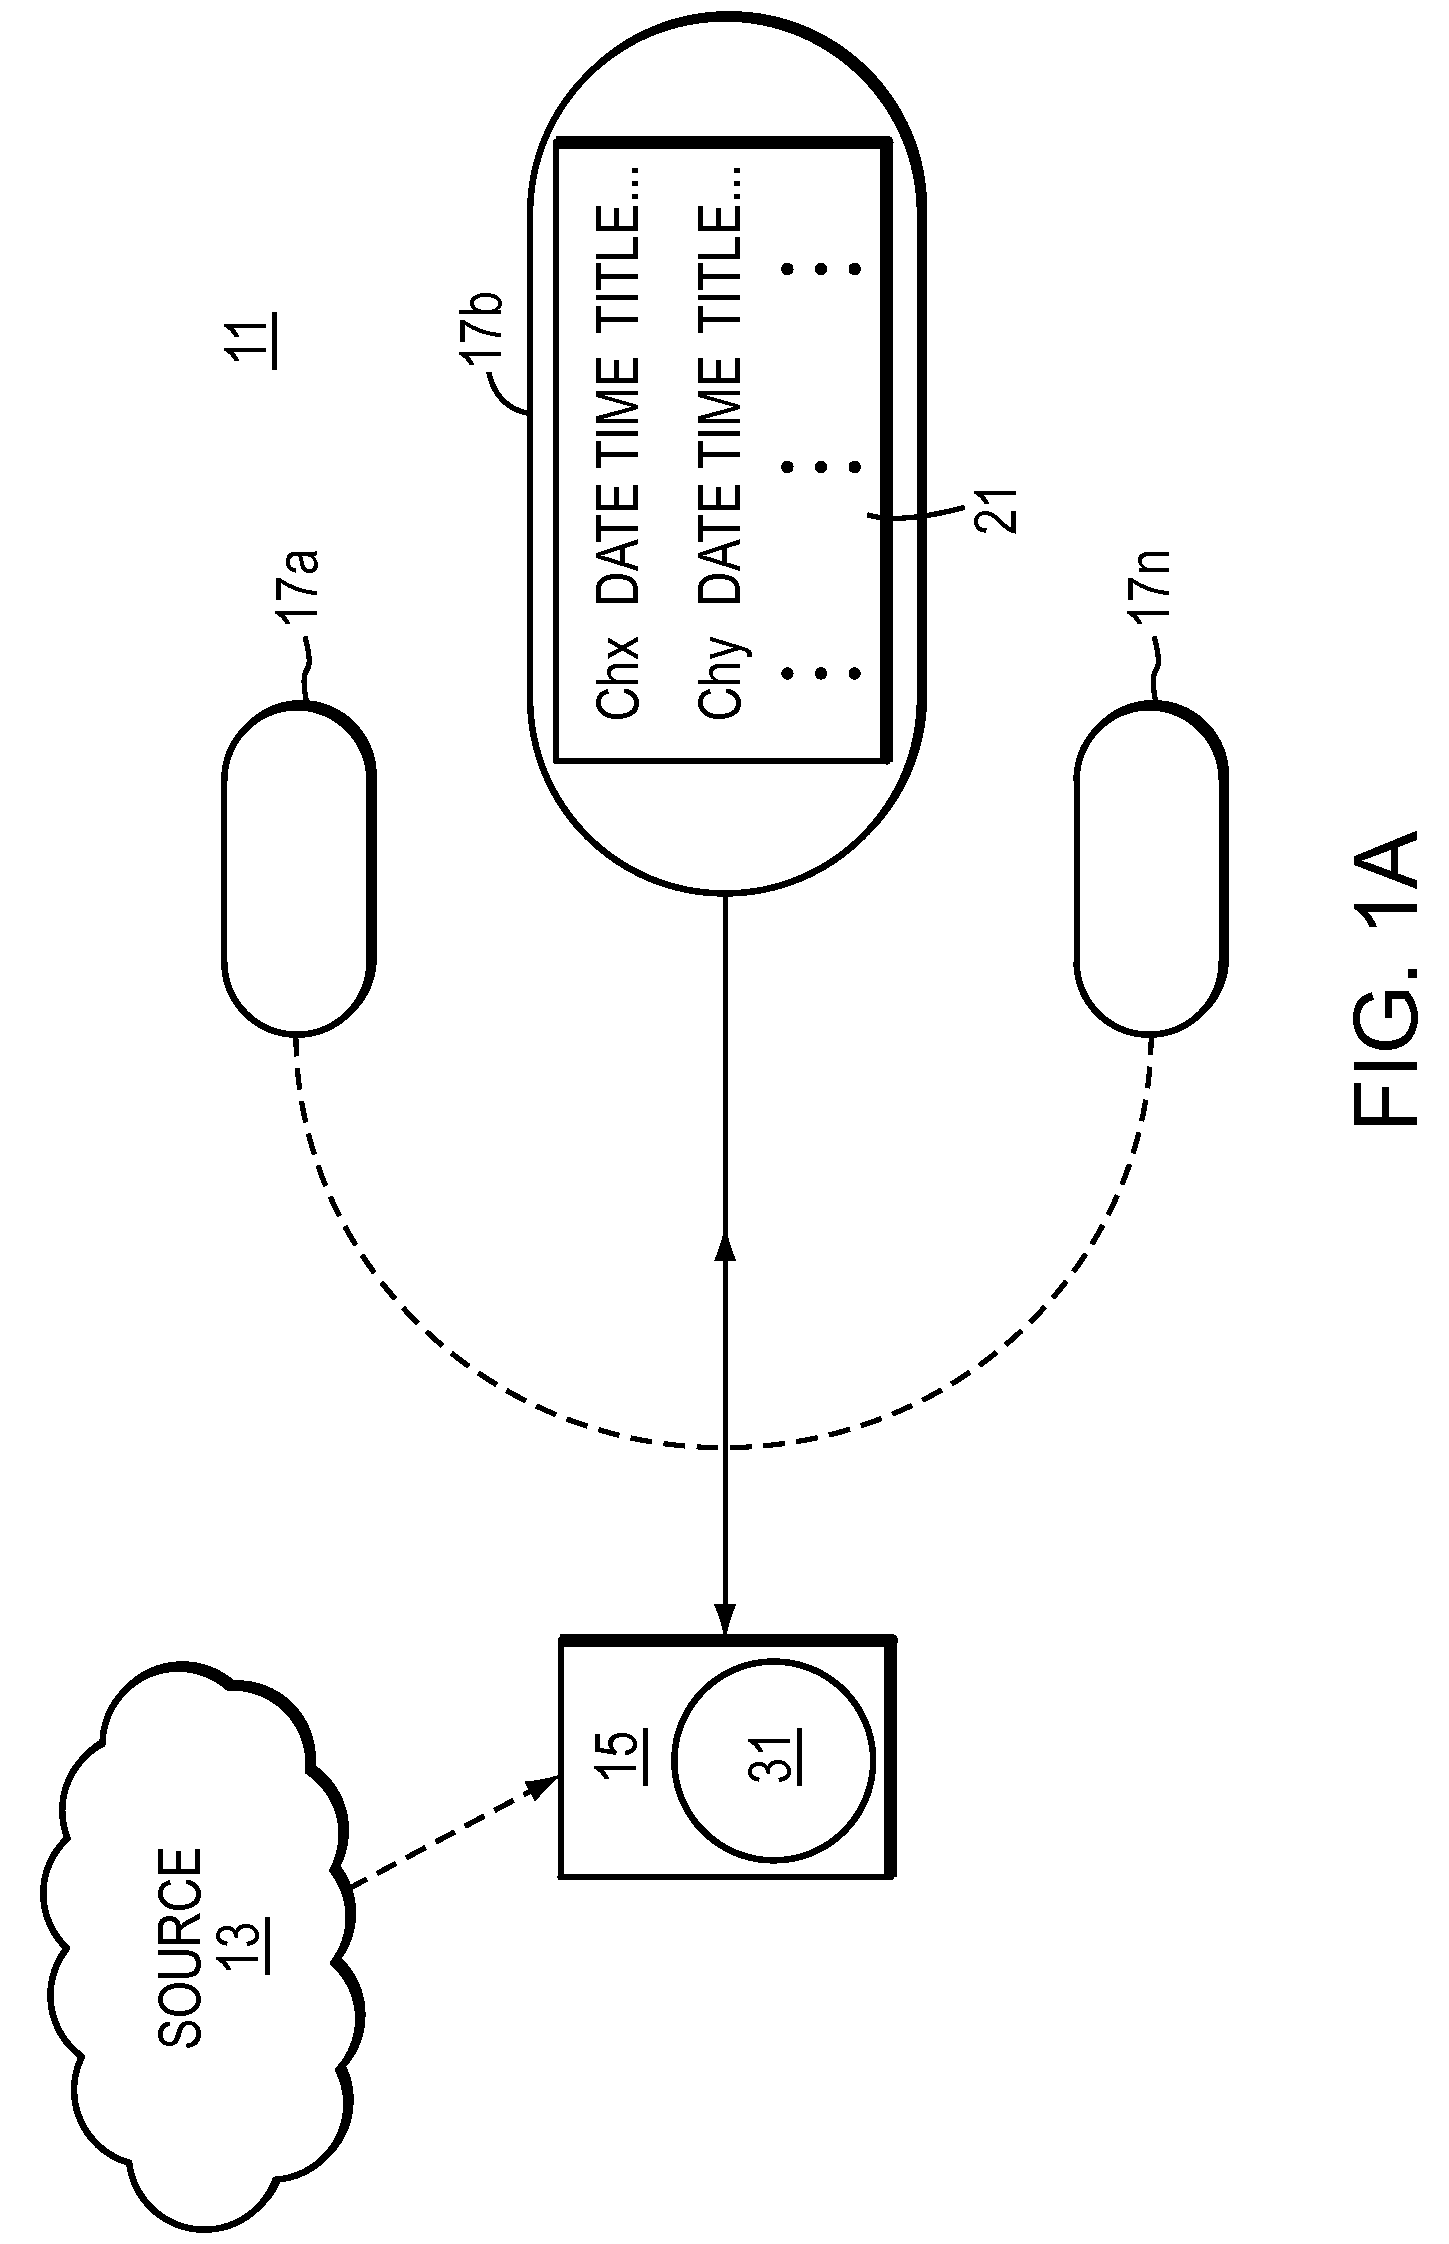 Method and apparatus for displaying interactions with media by members of a social software system